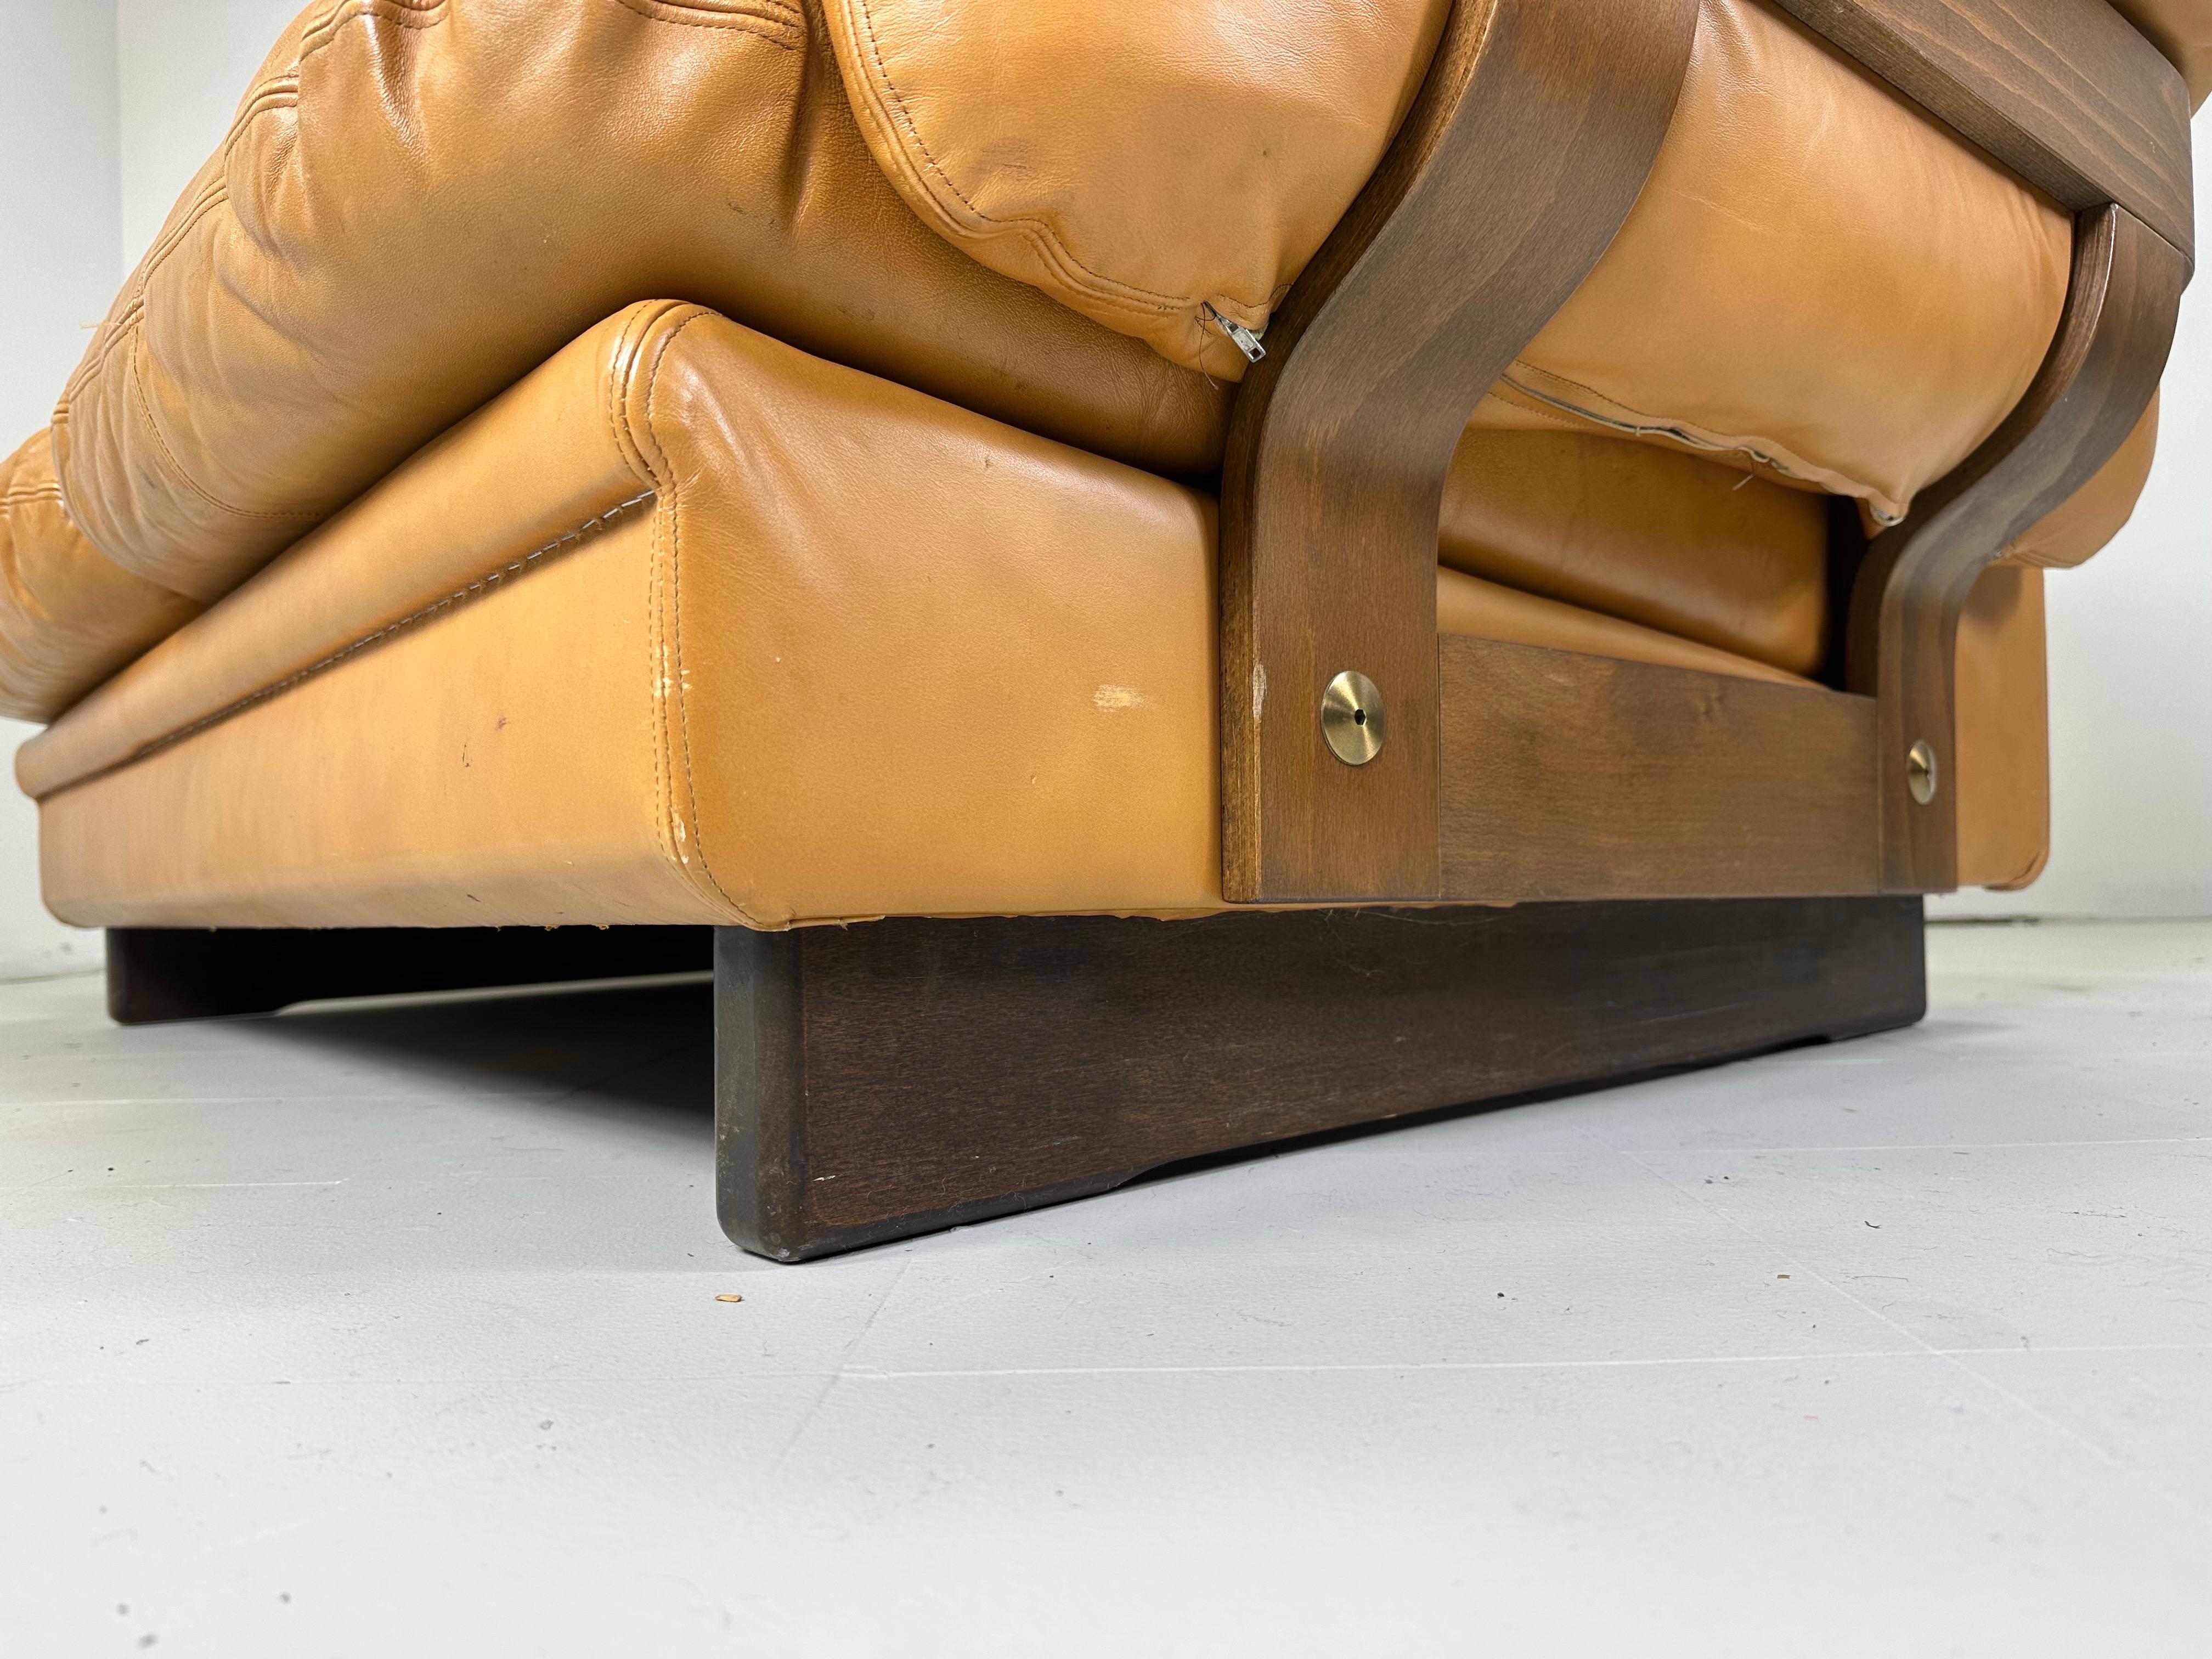 Brazilian 1970’s Leather Settee For Sale